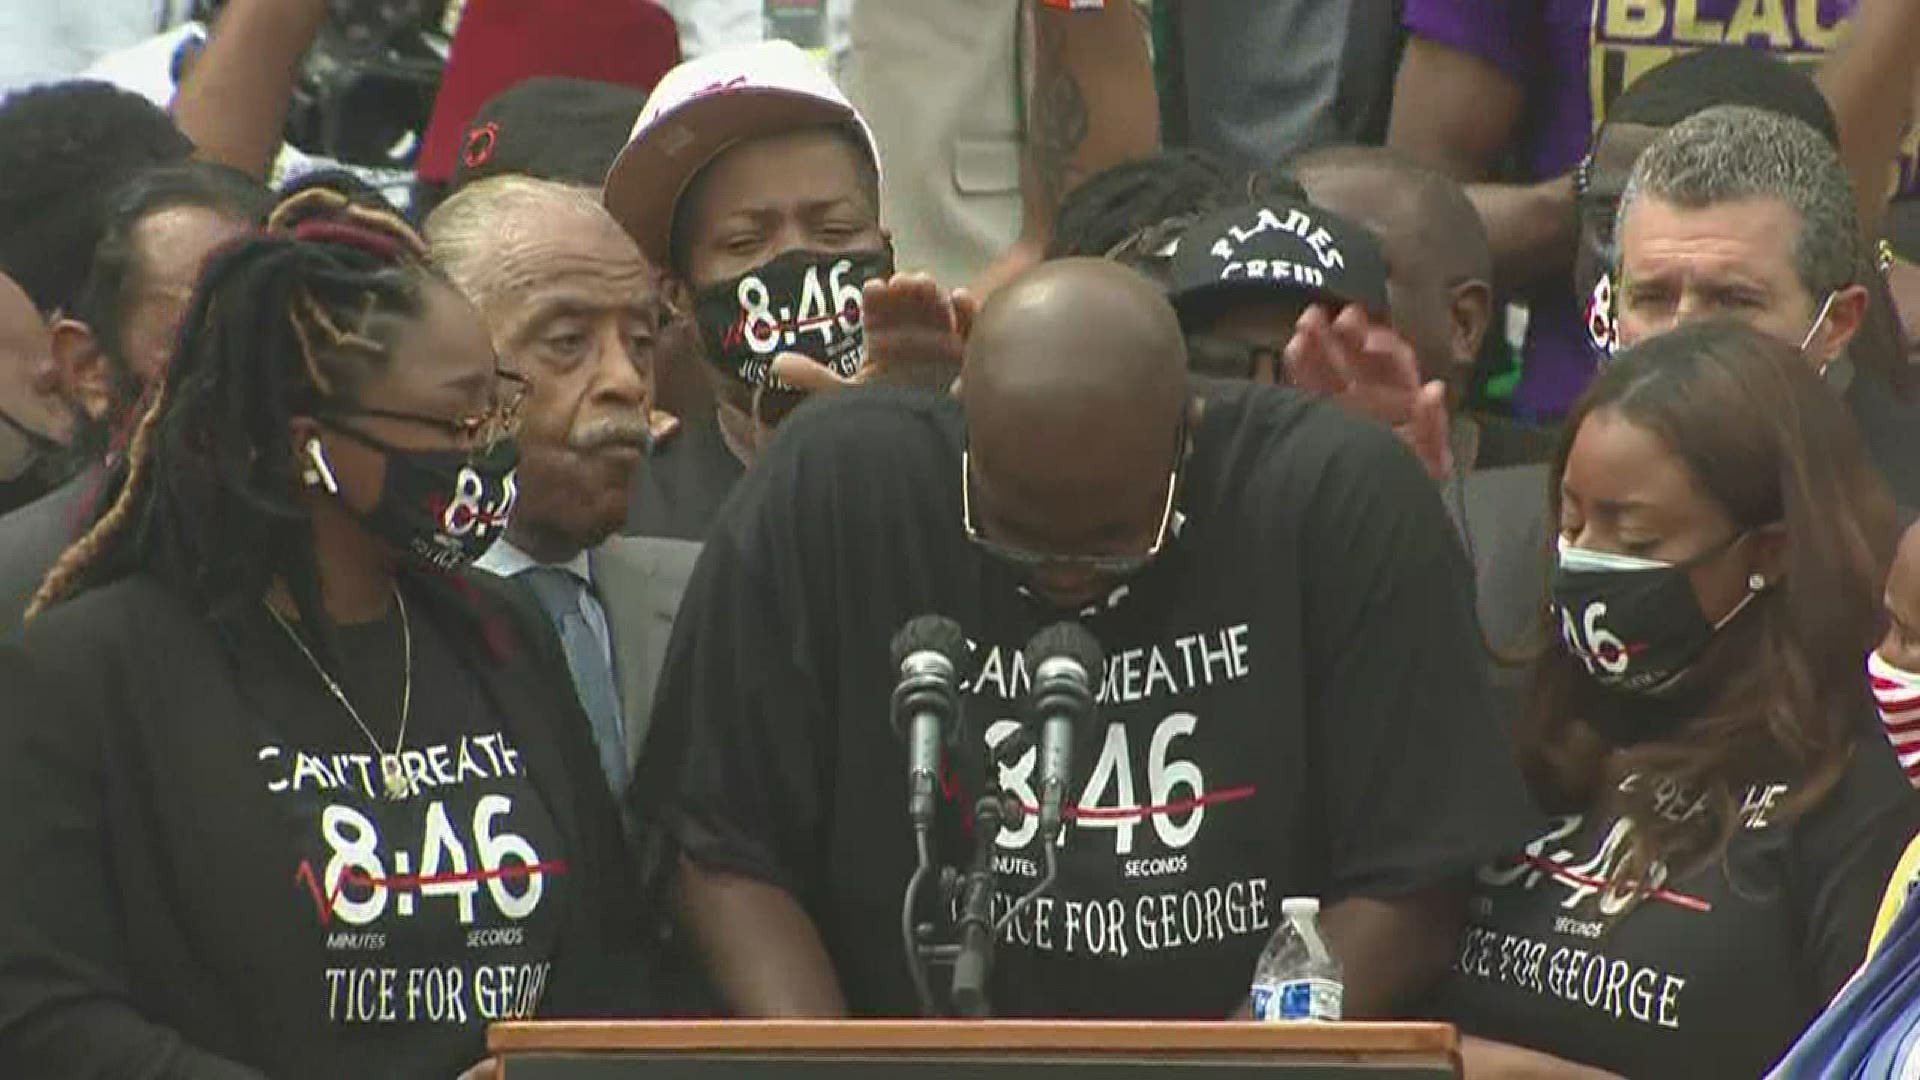 George Floyd's brother, Philonise Floyd, delivered an emotional speech in honor of all victims killed by police.